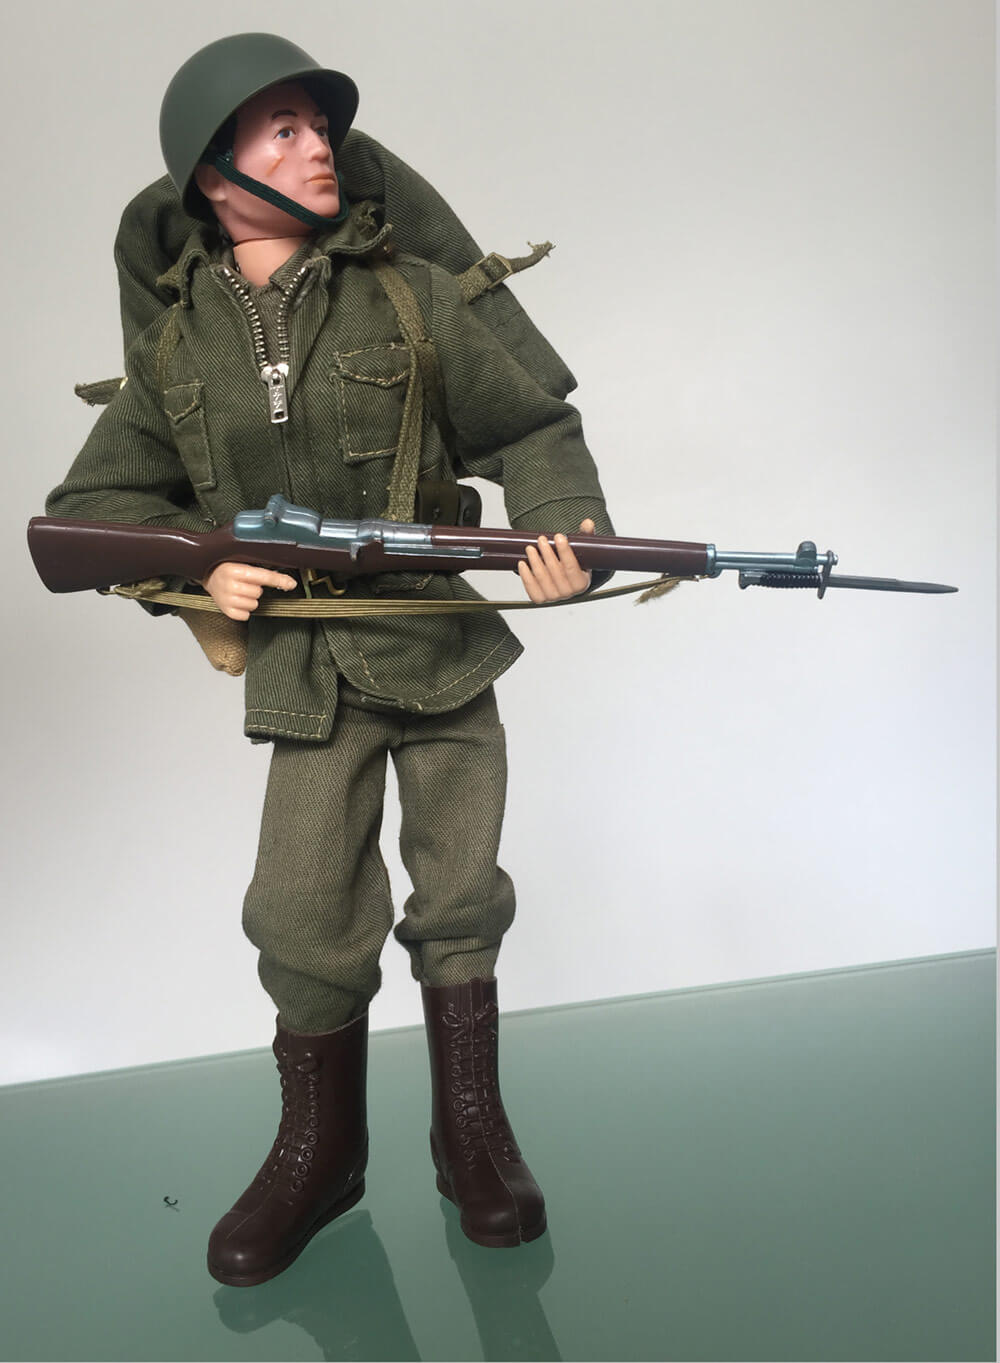 action man action soldier